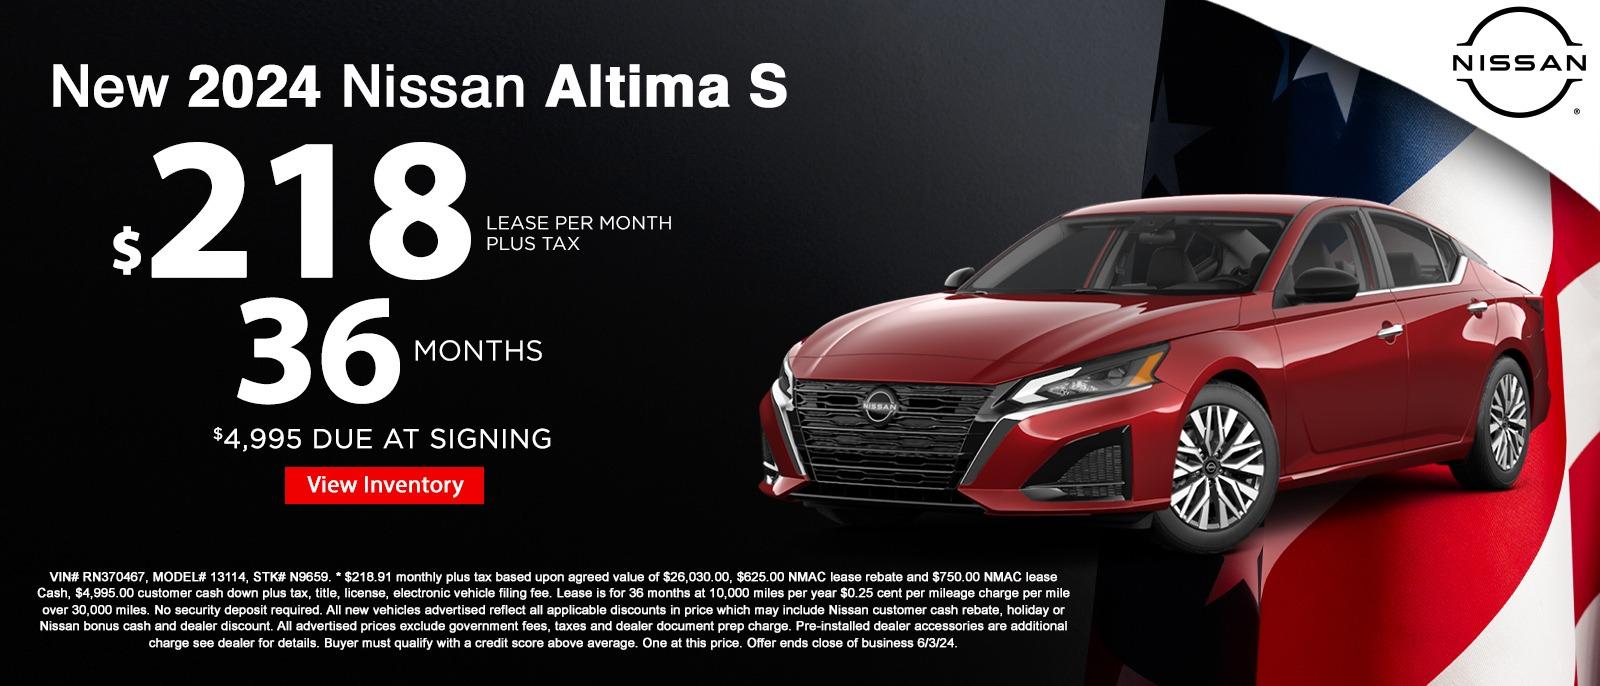 New 2024 Nissan Altima S 
$218 lease per month plus tax
36 months
$4,995 due at signing